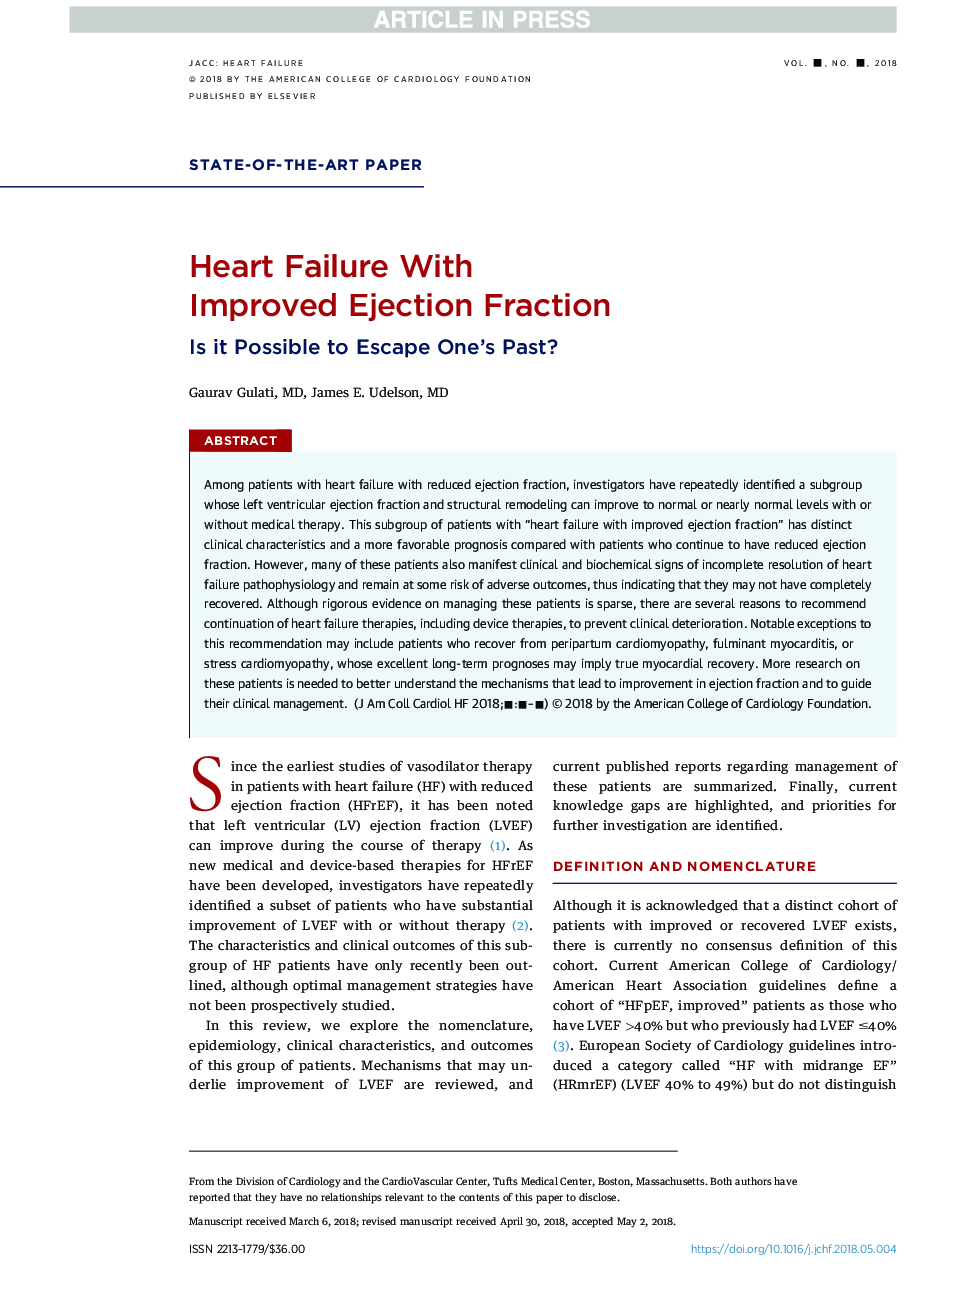 Heart Failure With ImprovedÂ EjectionÂ Fraction